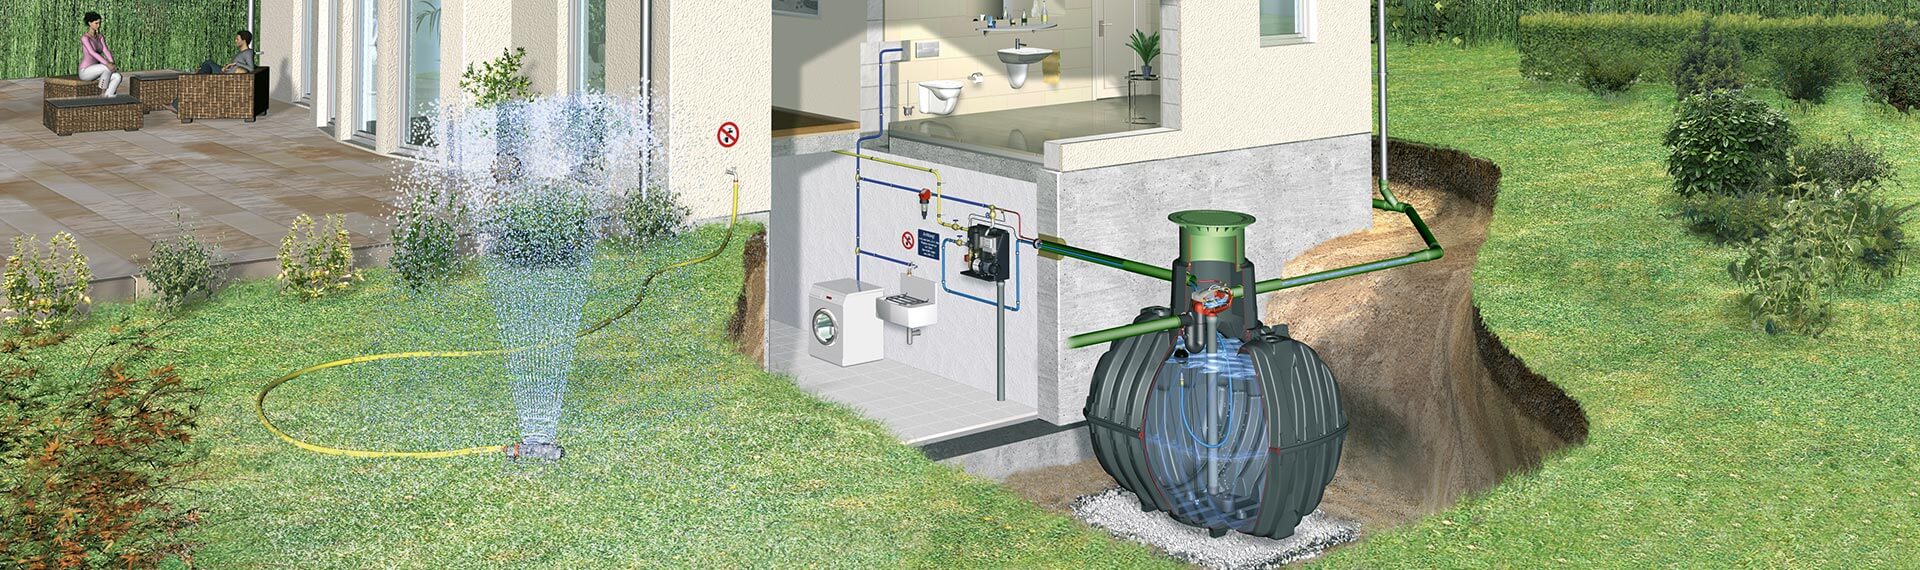 All about rainwater harvesting